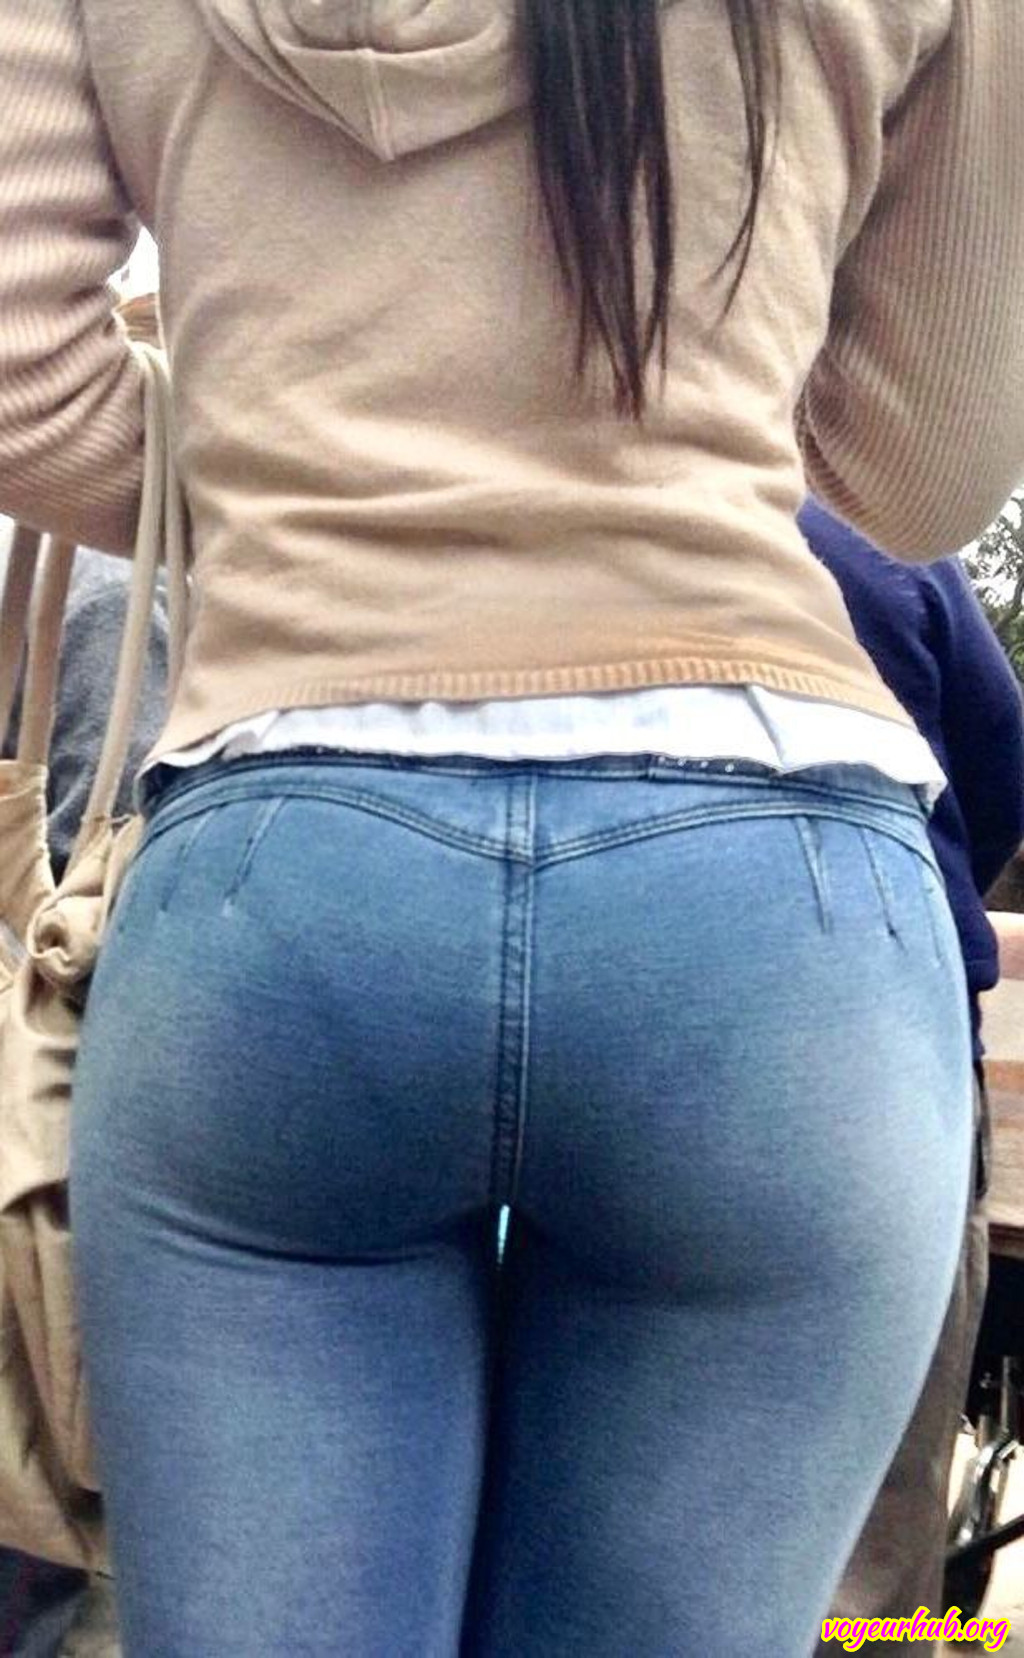 girls in tight jeans